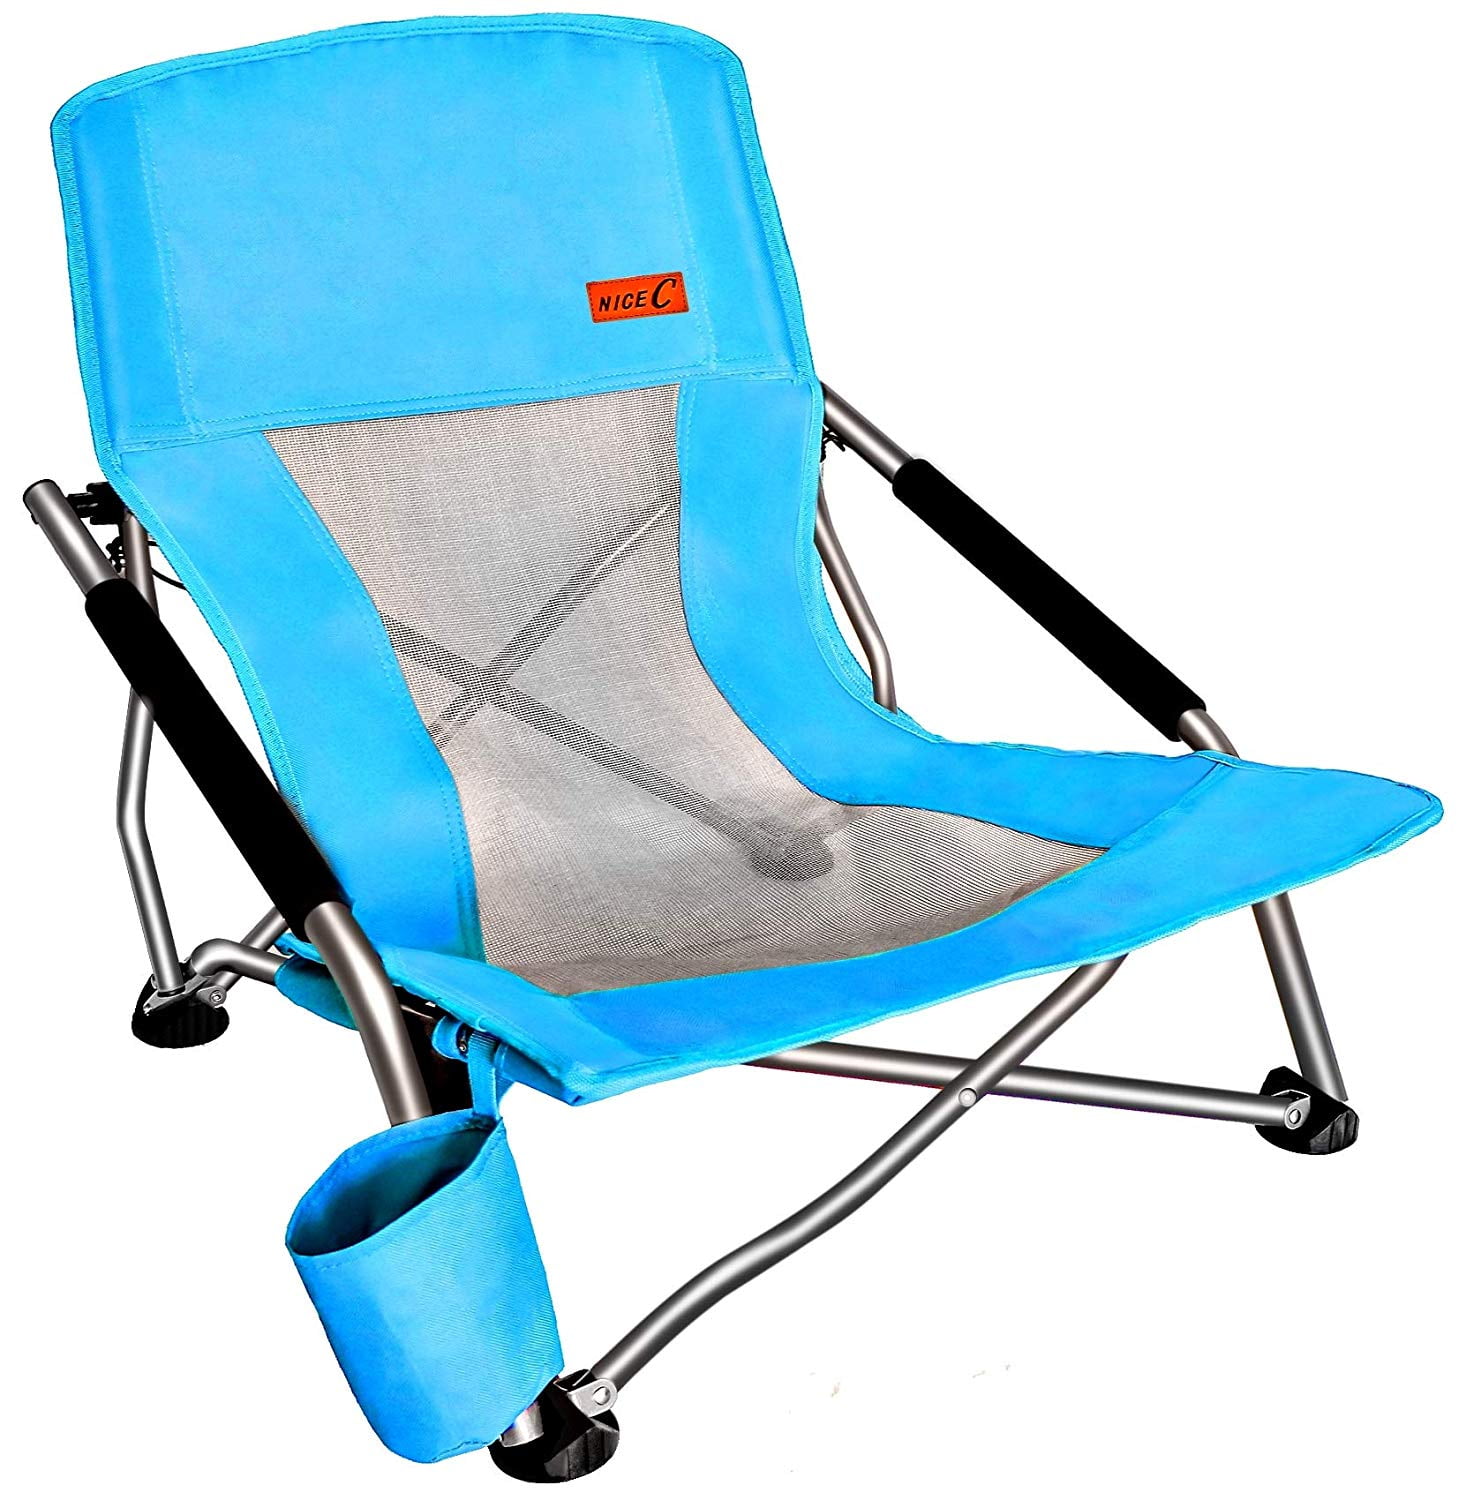 Supports 154 LBS AOTOMIO Portable Outdoor Folding Beach Chair with Simple Cup Holder for Camping and Fishing Automio